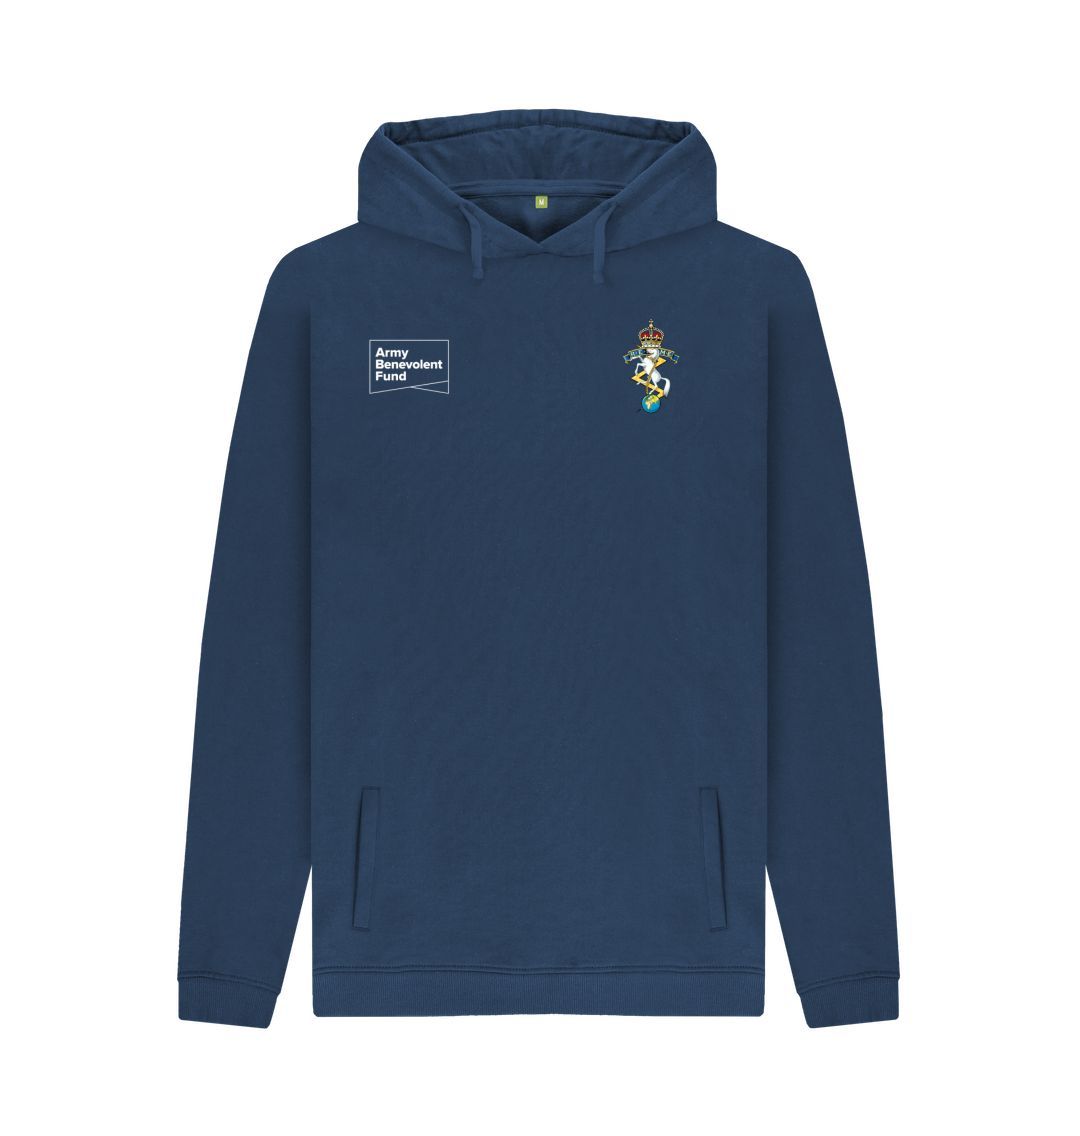 Corps of Royal Electrical and Mechanical Engineers Unisex Hoodie - Army Benevolent Fund